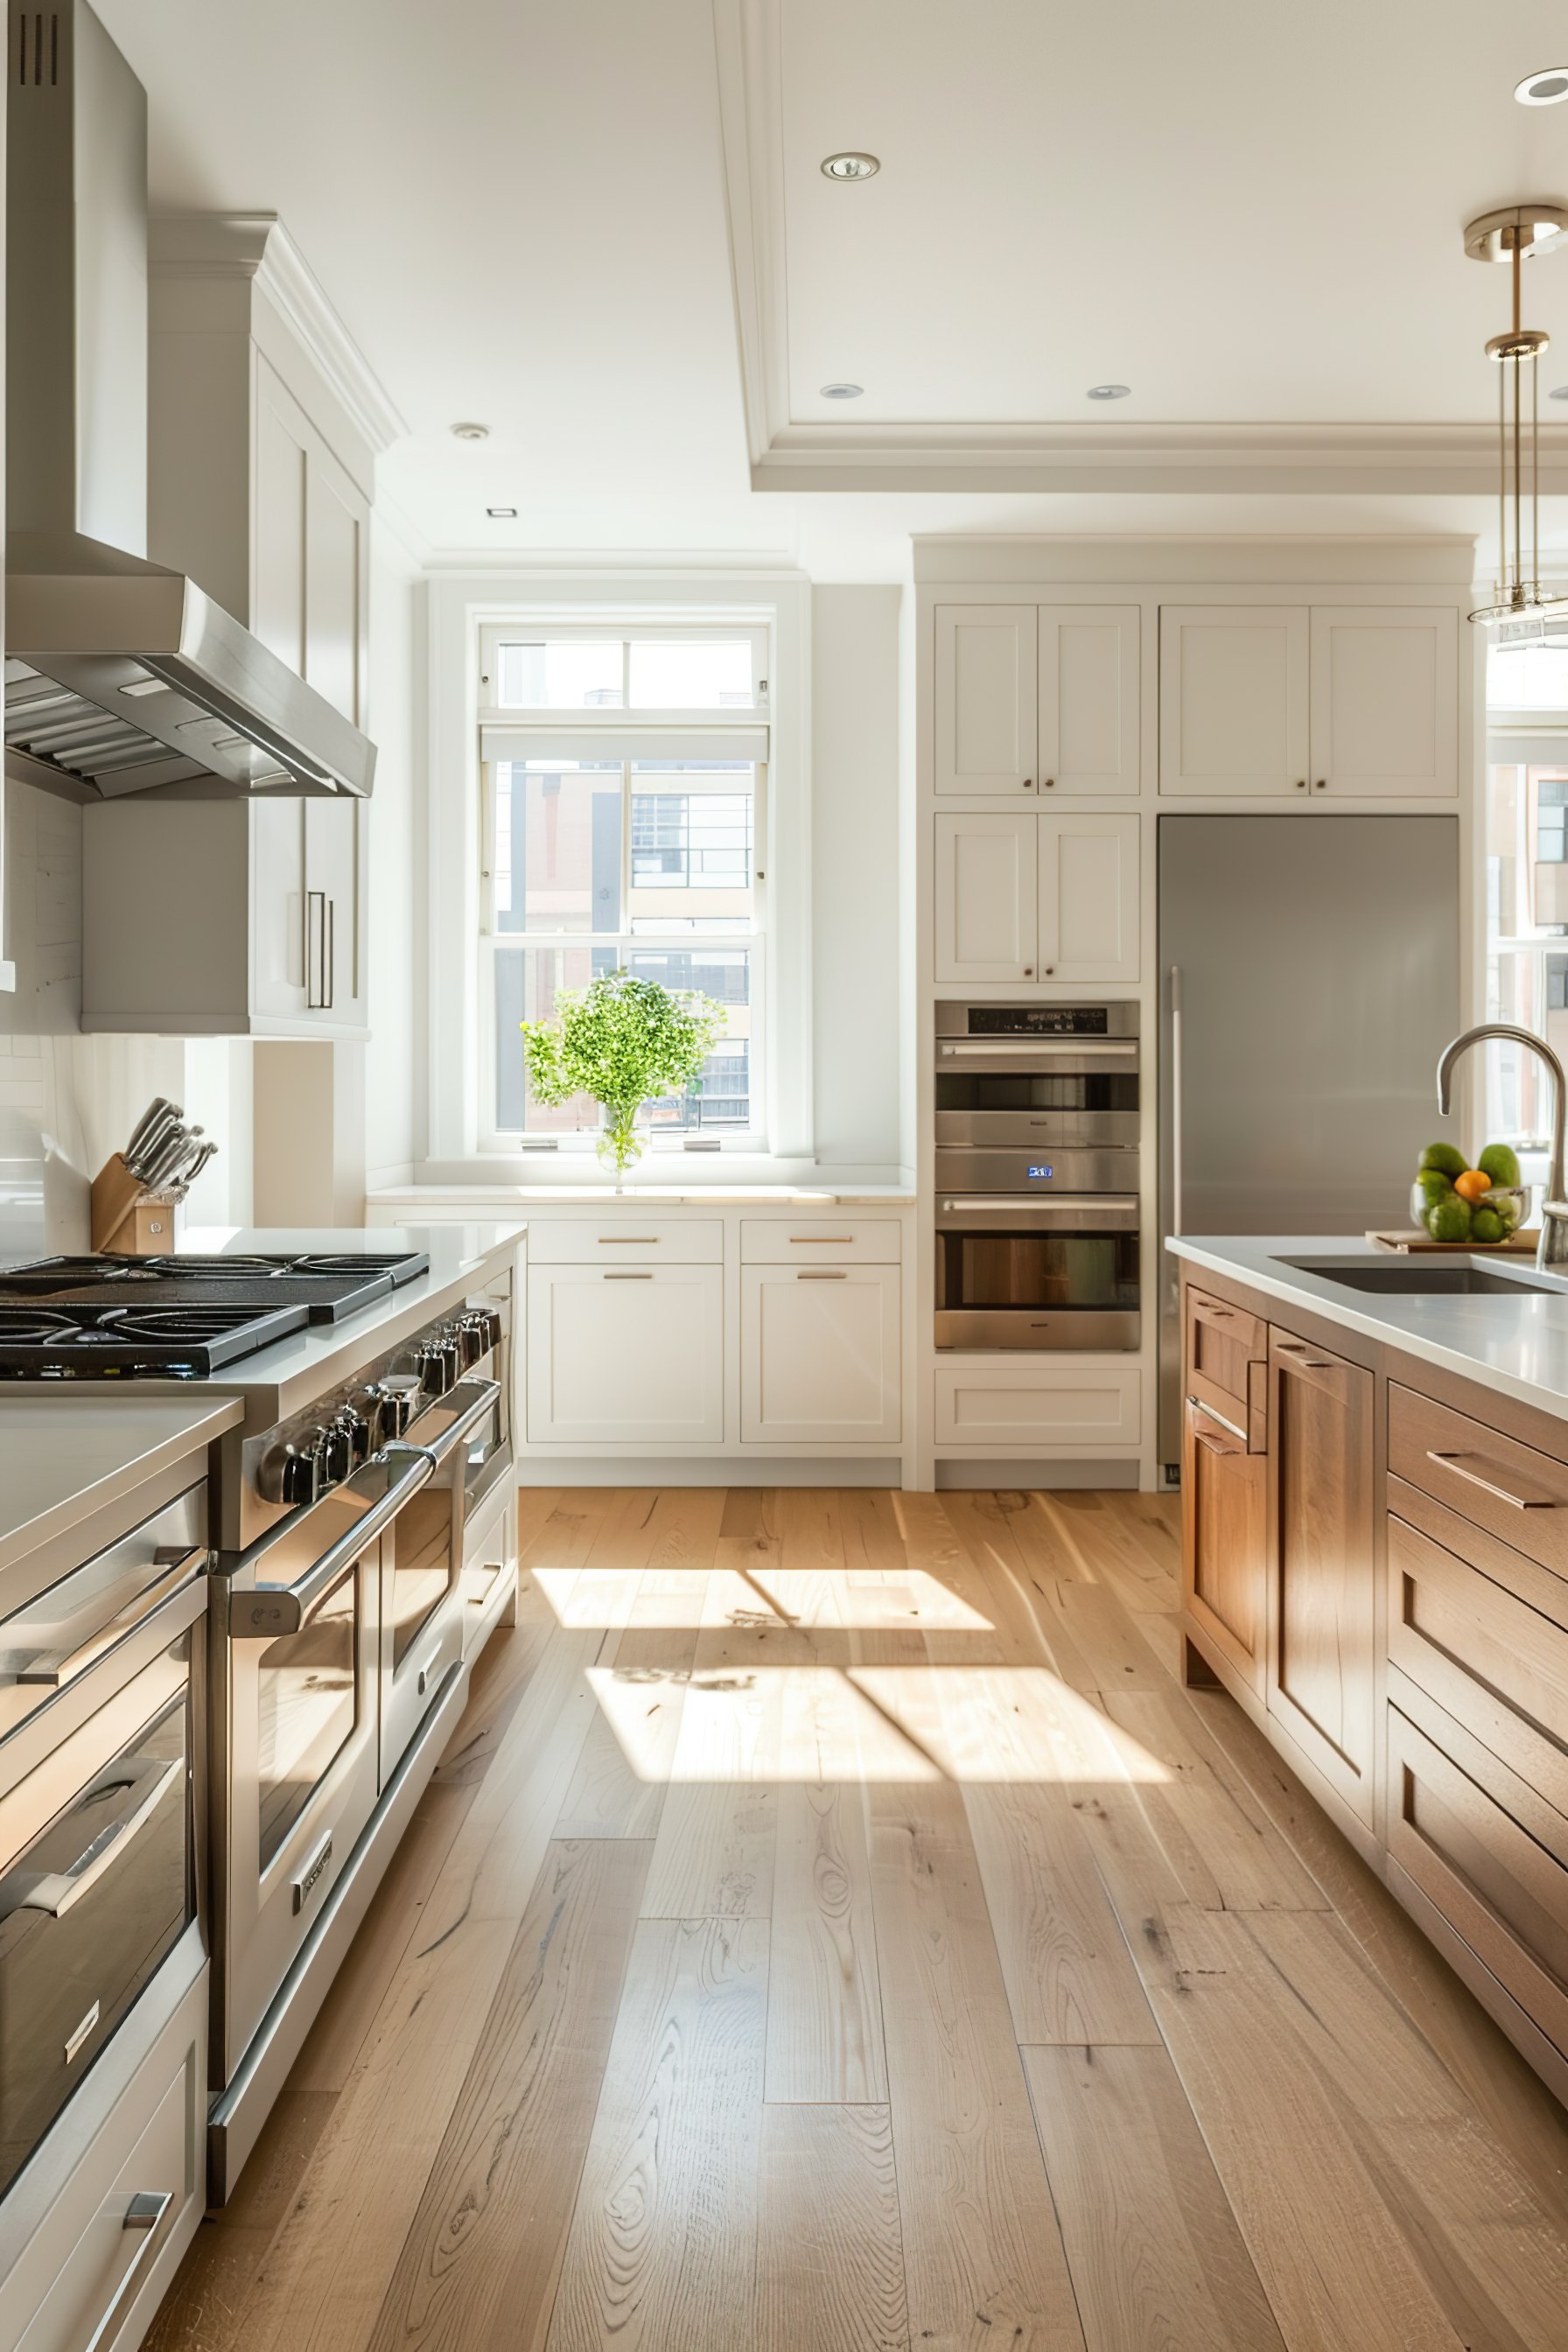 Modern kitchen interior with white cabinets, stainless steel appliances, and hardwood floors bathed in natural sunlight.